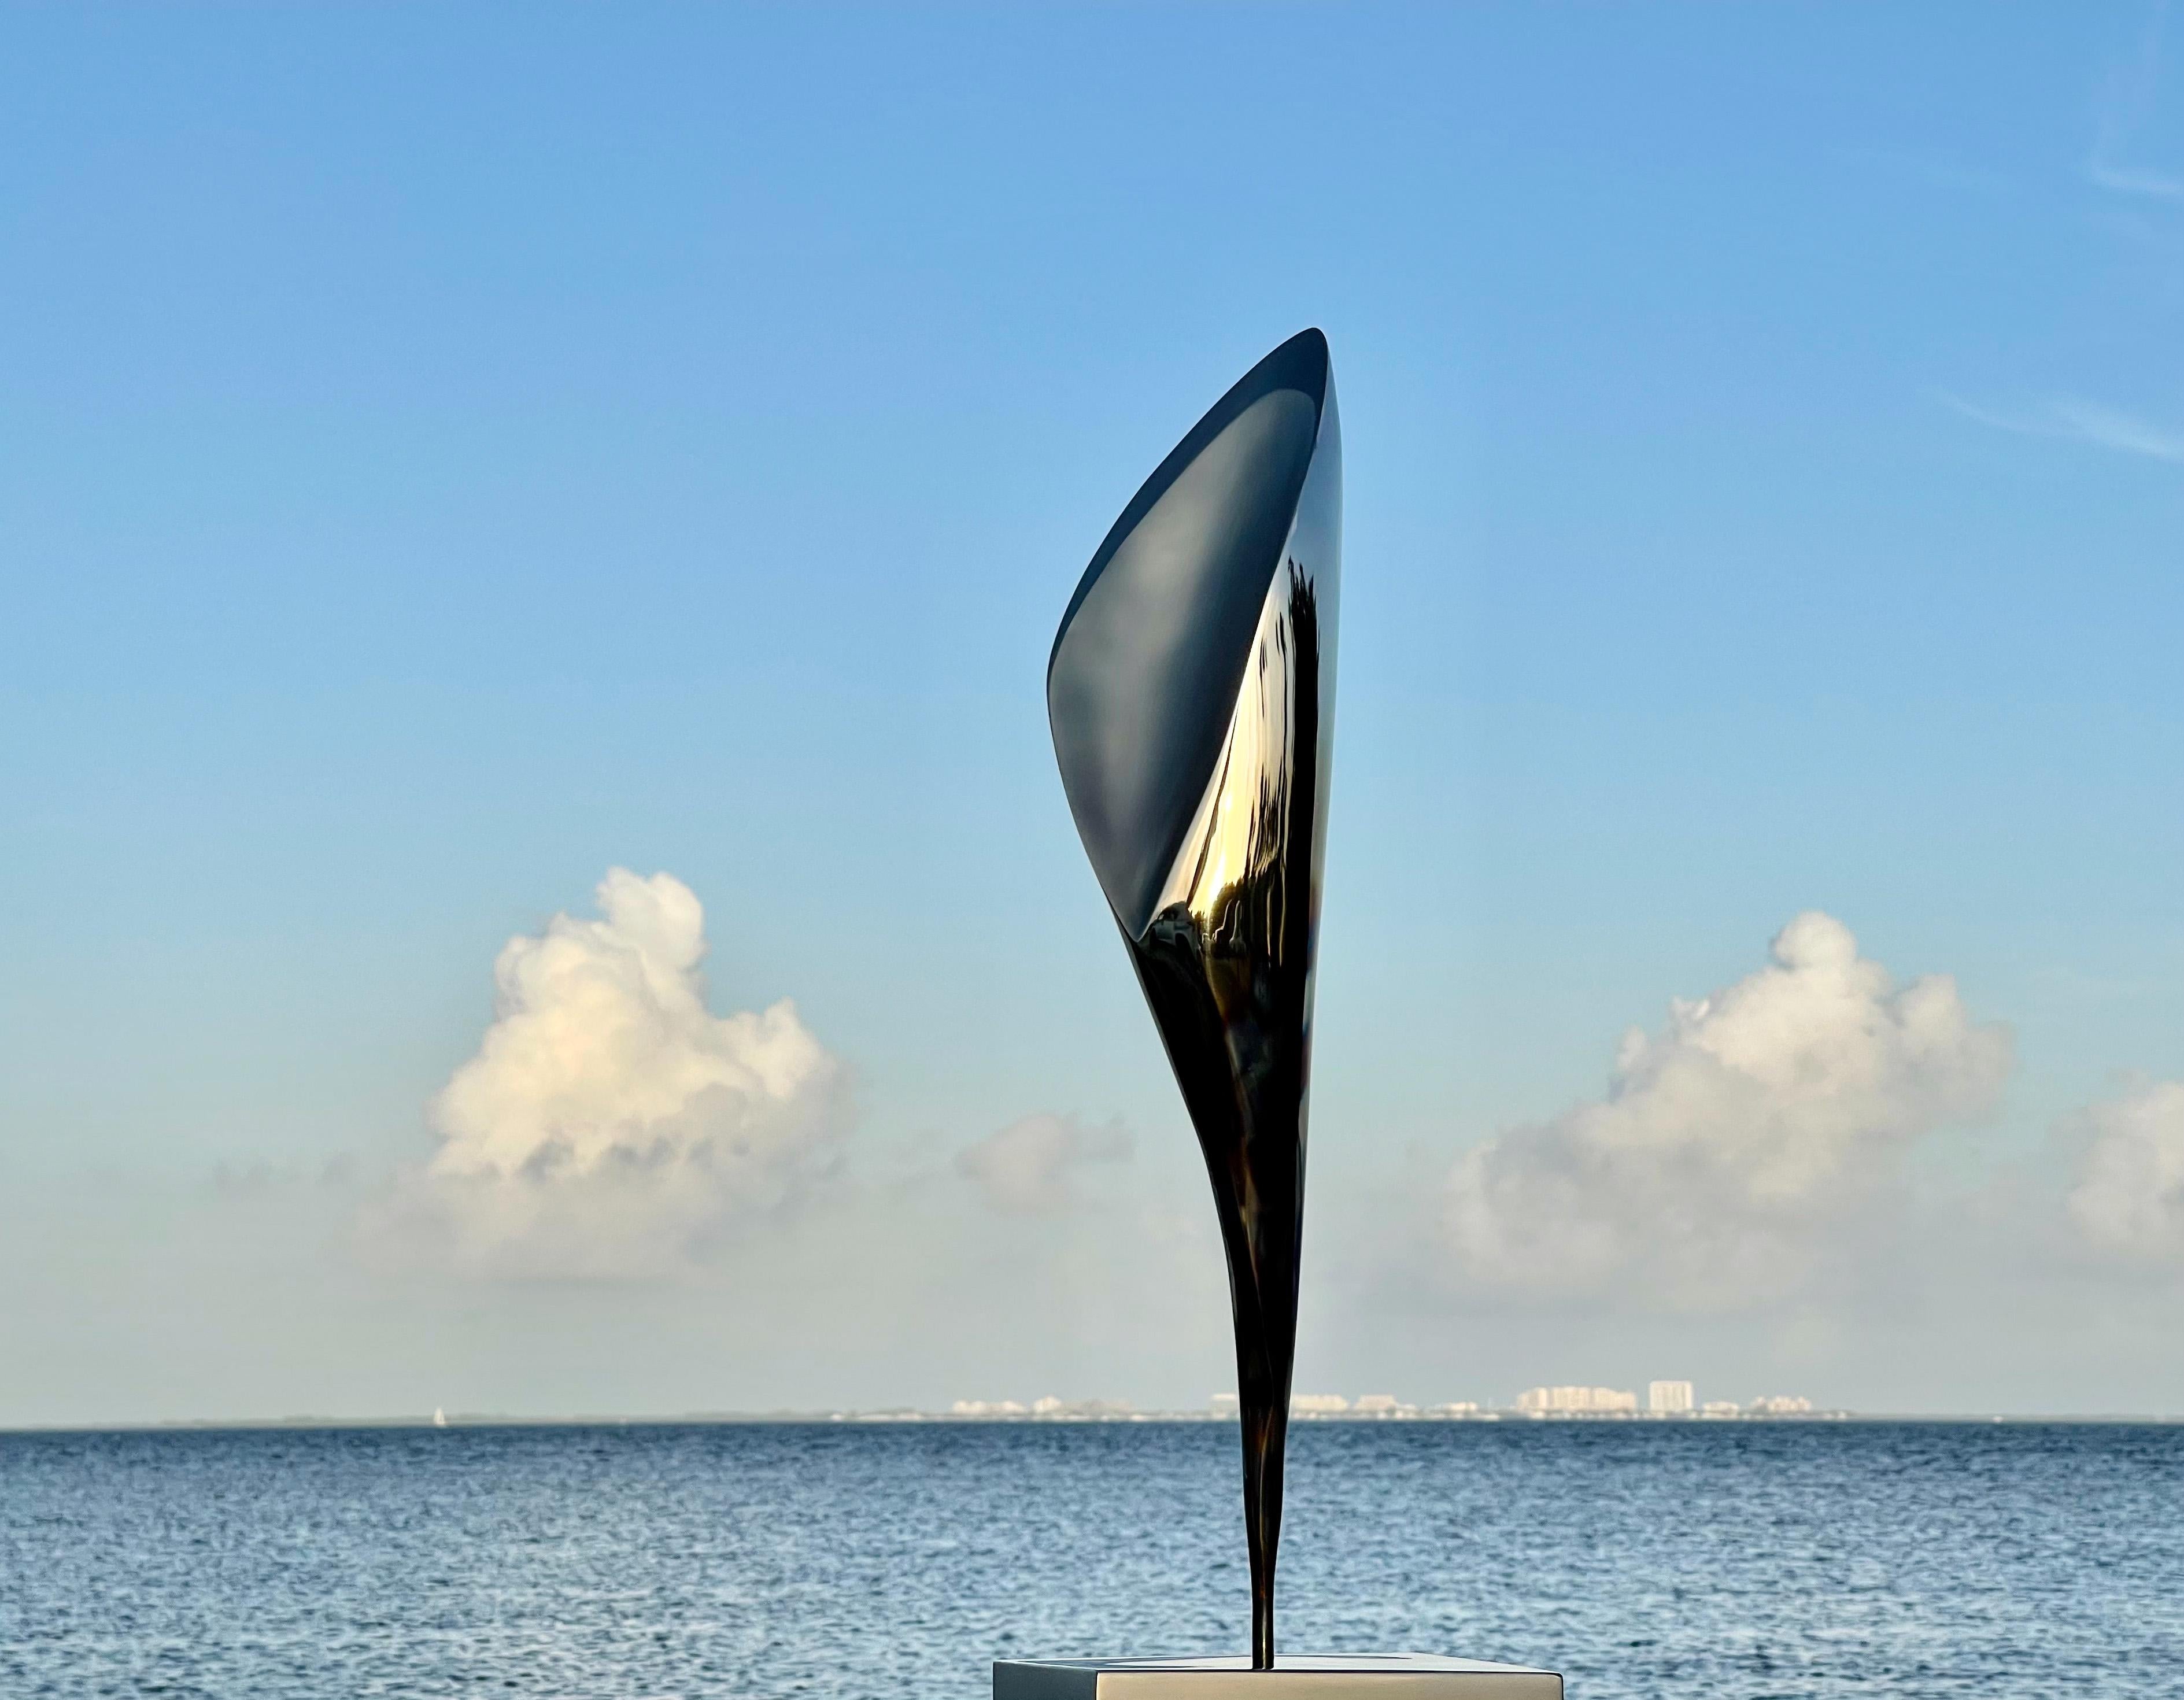 Marine outdoor Italian stainless steel.

This sculpture will be shipped directly from the artist's studio.